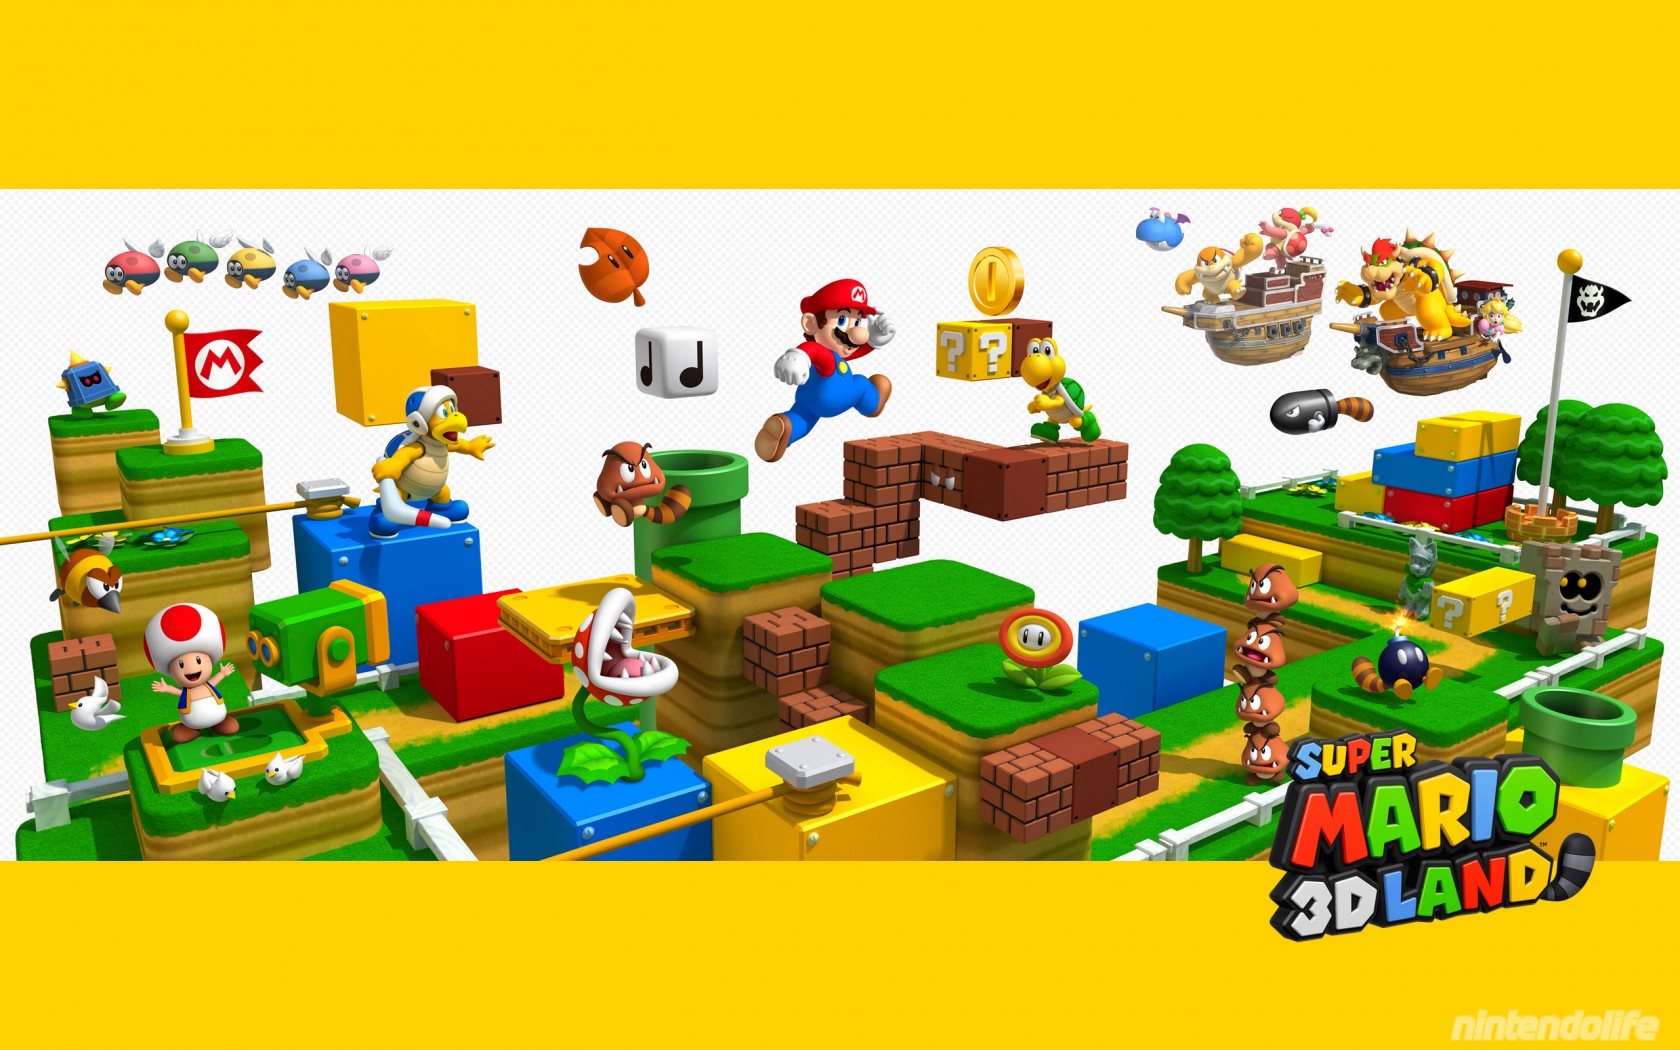 Out Today Super Mario 3d Land And Wallpaper Nintendo Life